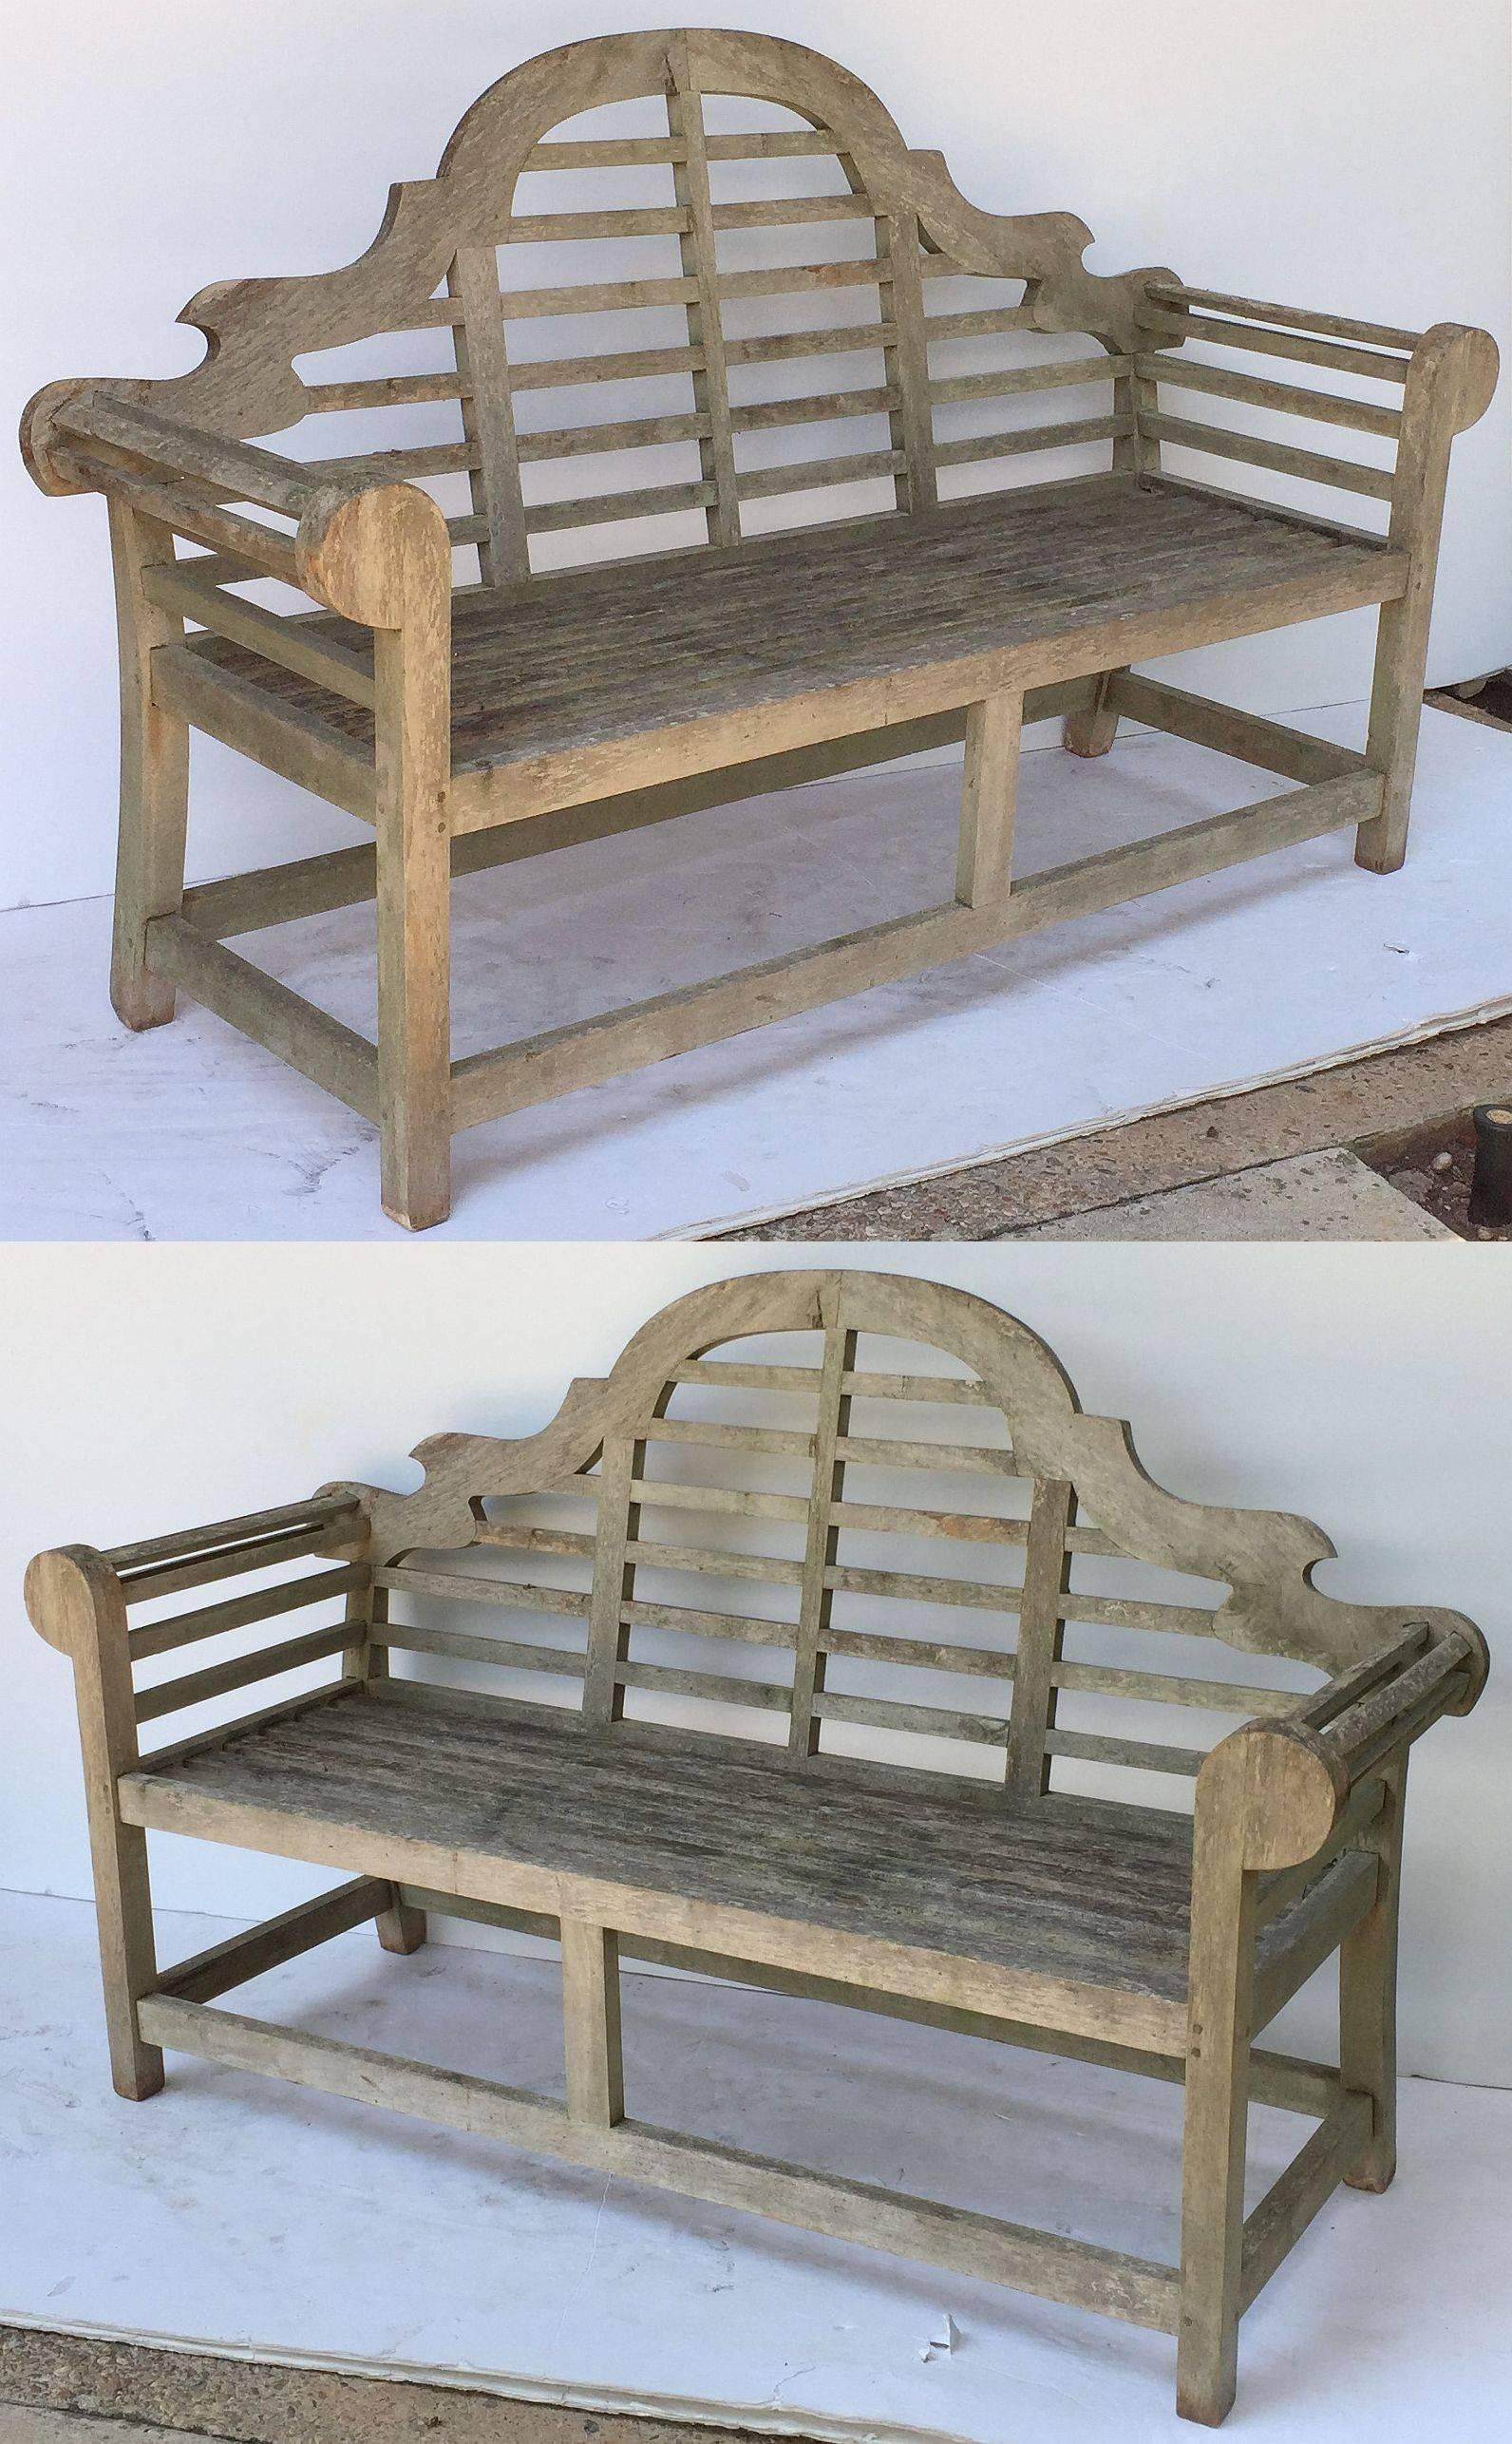 A fine pair of vintage Lutyens style teak garden benches after Sir Edwin Lutyens, the British architect renowned for his imaginative, classic designs throughout England, Ireland and New Delhi (India).

Each bench featuring a high-arched back for